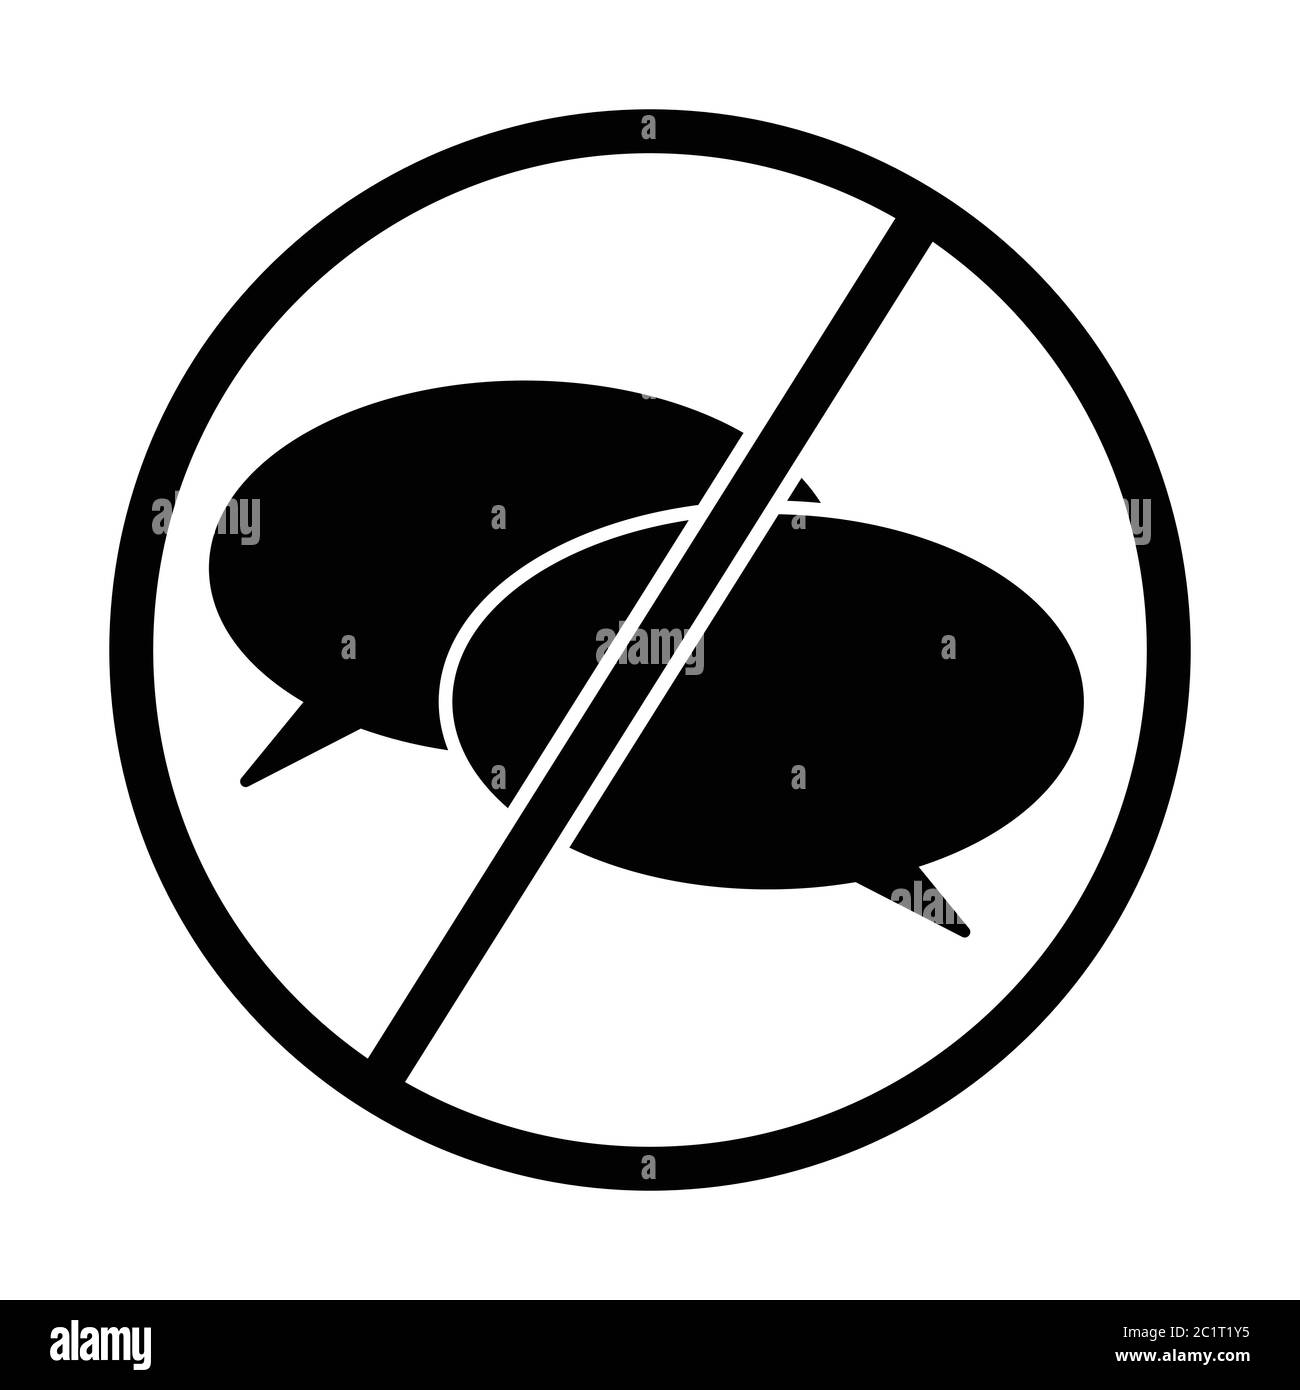 No Talking Sign Icon. Two Speech Bubbles in a Prohibited or Do Not Sign. Black Illustration Isolated on a White Background. EPS Vector Stock Vector